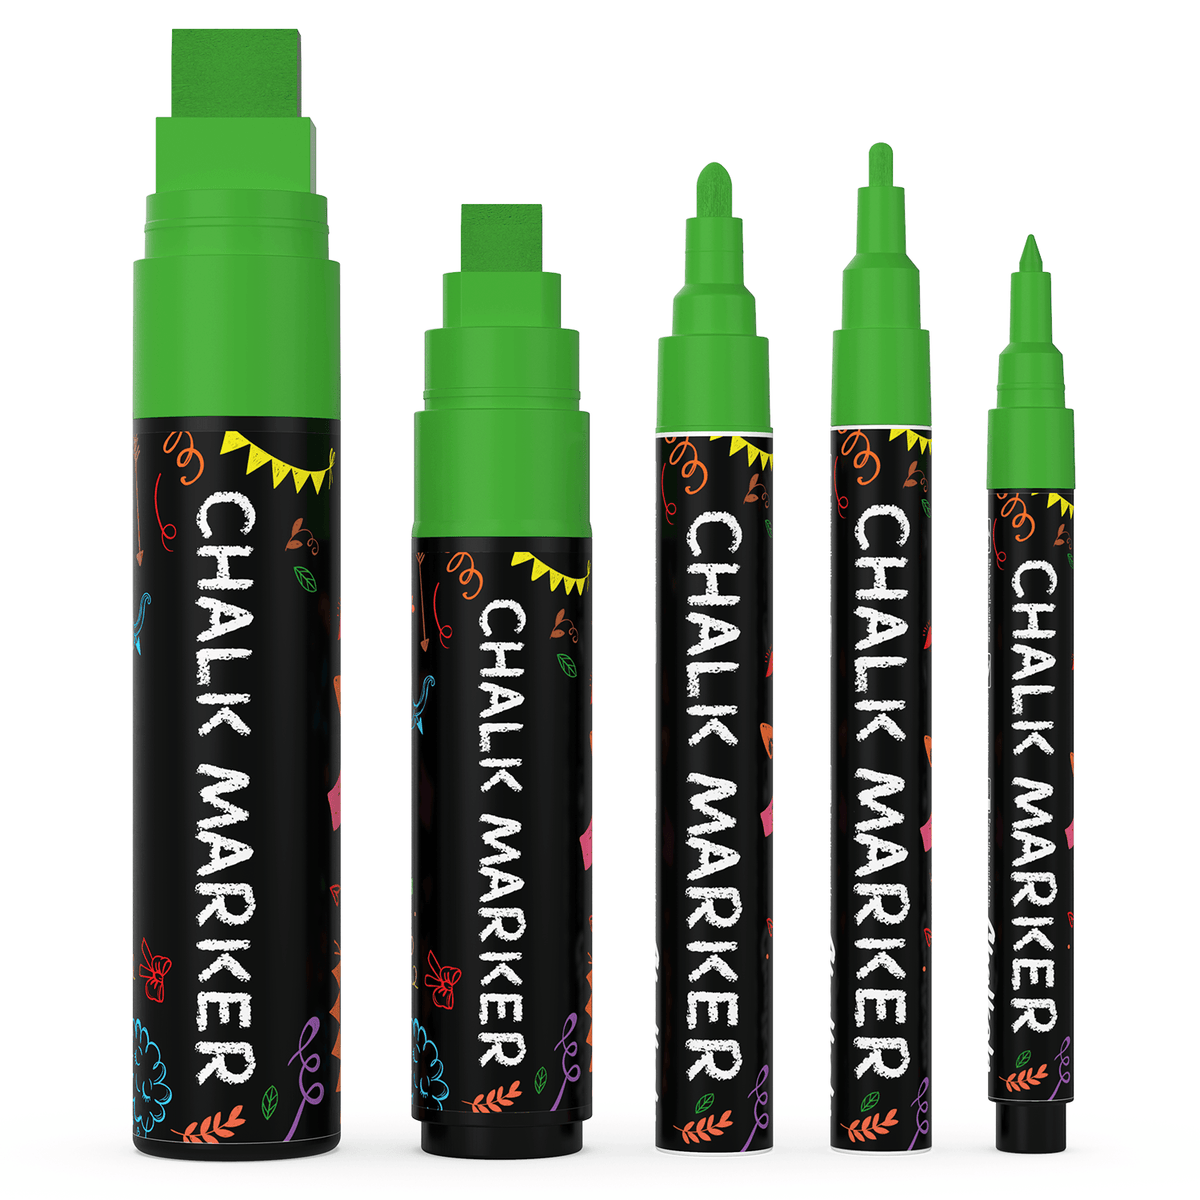 Single Colored Chalk Markers (Fine to Jumbo Nibs) - Variety Pack of 5 Pens